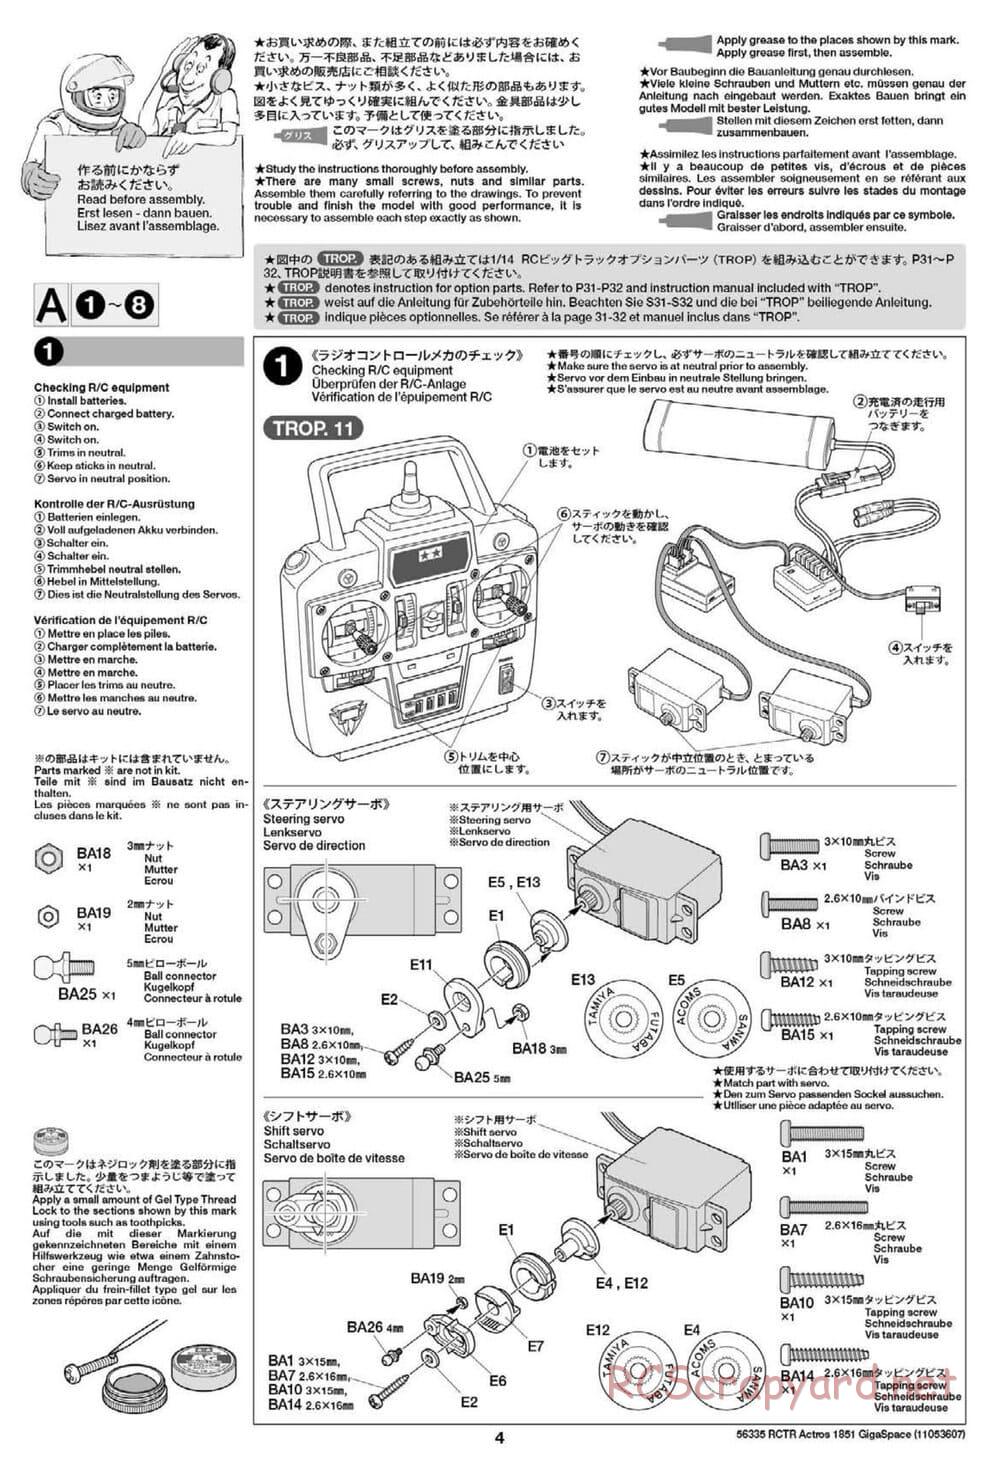 Tamiya - Mercedes-Benz Actros 1851 Gigaspace Tractor Truck Chassis - Manual - Page 4